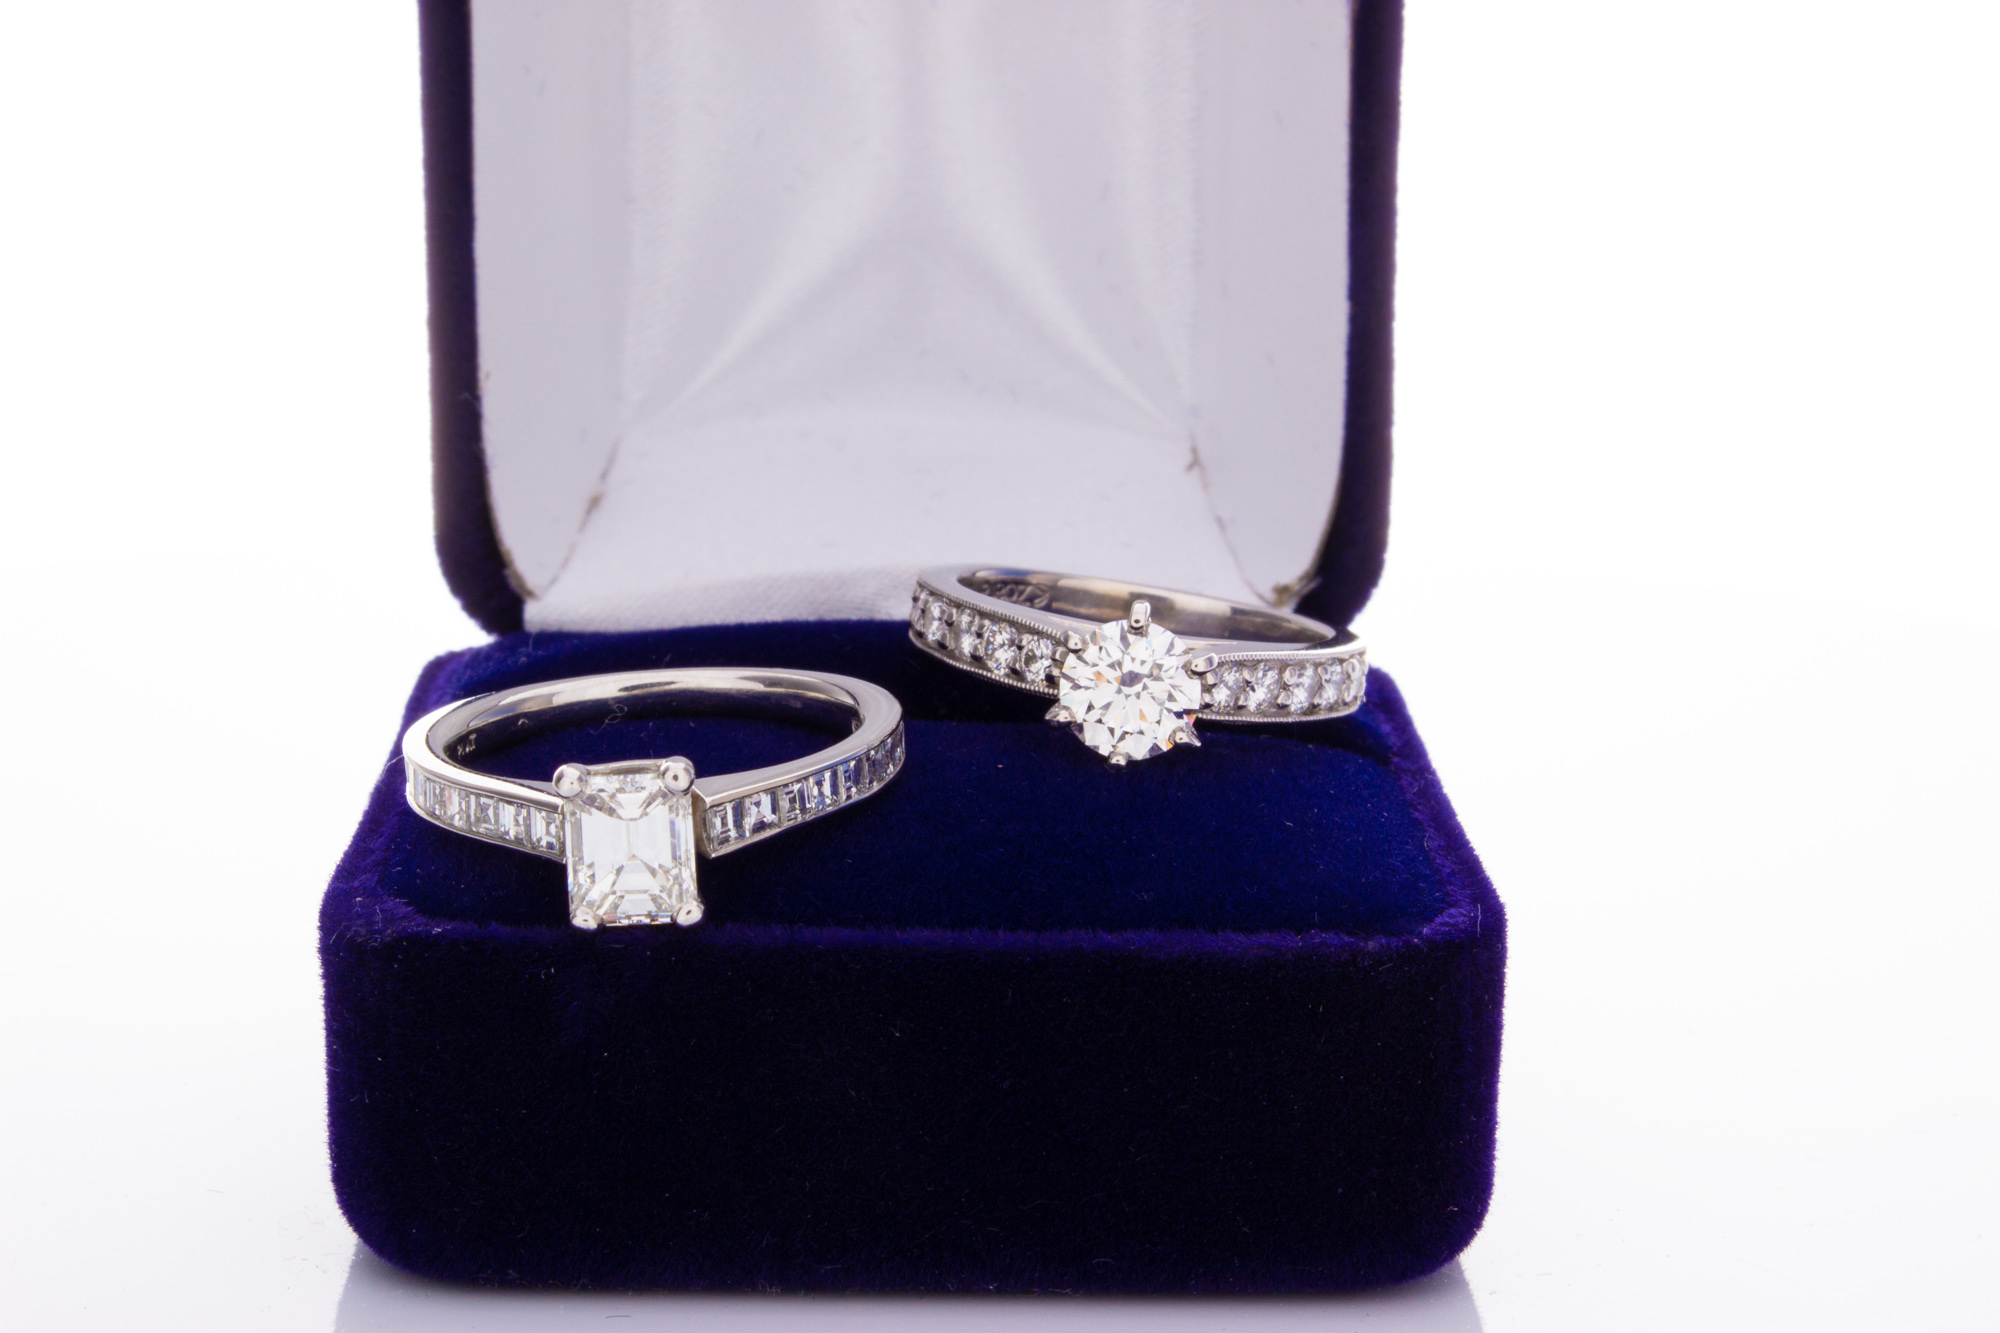 Estate Heirloom Engagement Find your perfect engagement ring among Kansas City's finest estate jewelry collection. View Vintage Engagement Rings from our estate jewelry to find a treasured, heirloom piece within your budget. Toner Jewelers Overland Park, KS